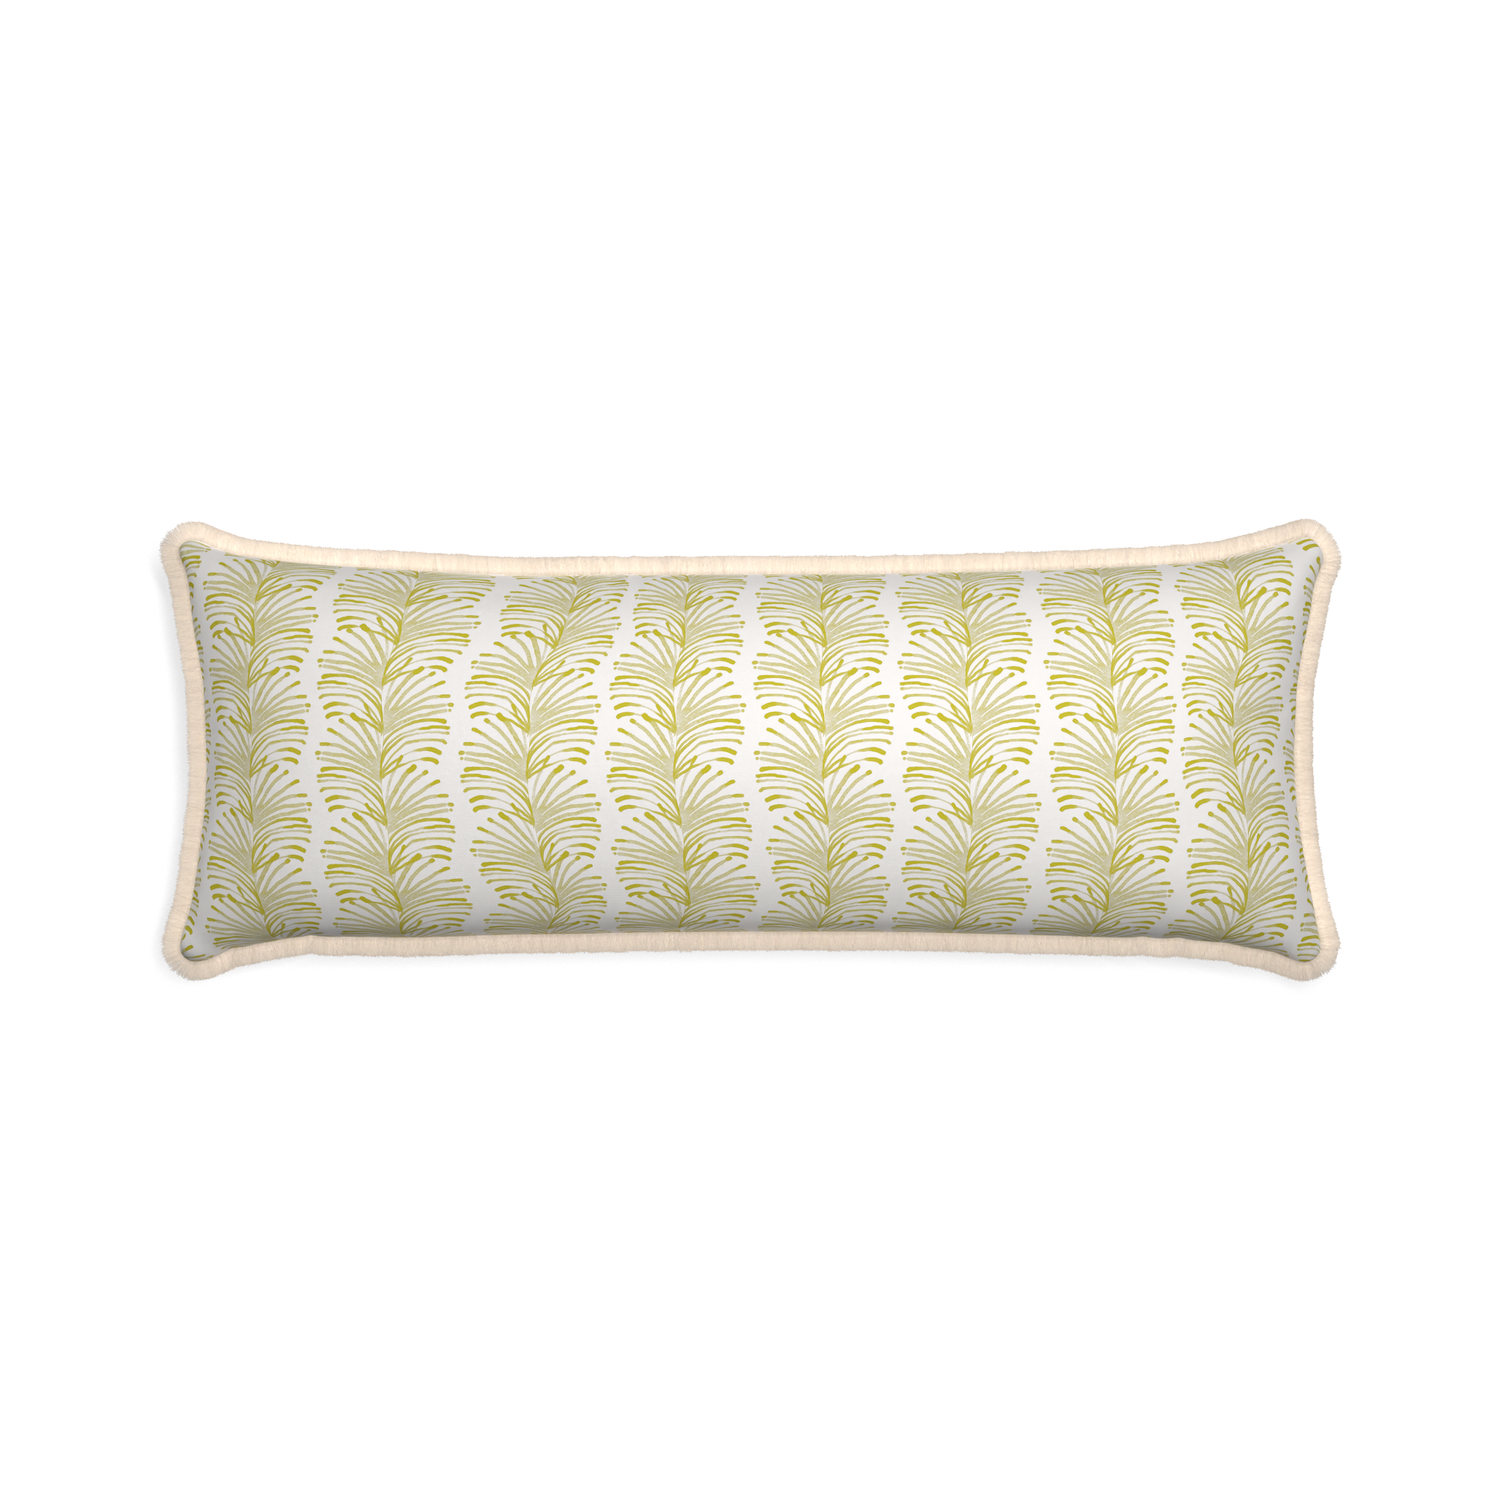 Xl-lumbar emma chartreuse custom pillow with cream fringe on white background